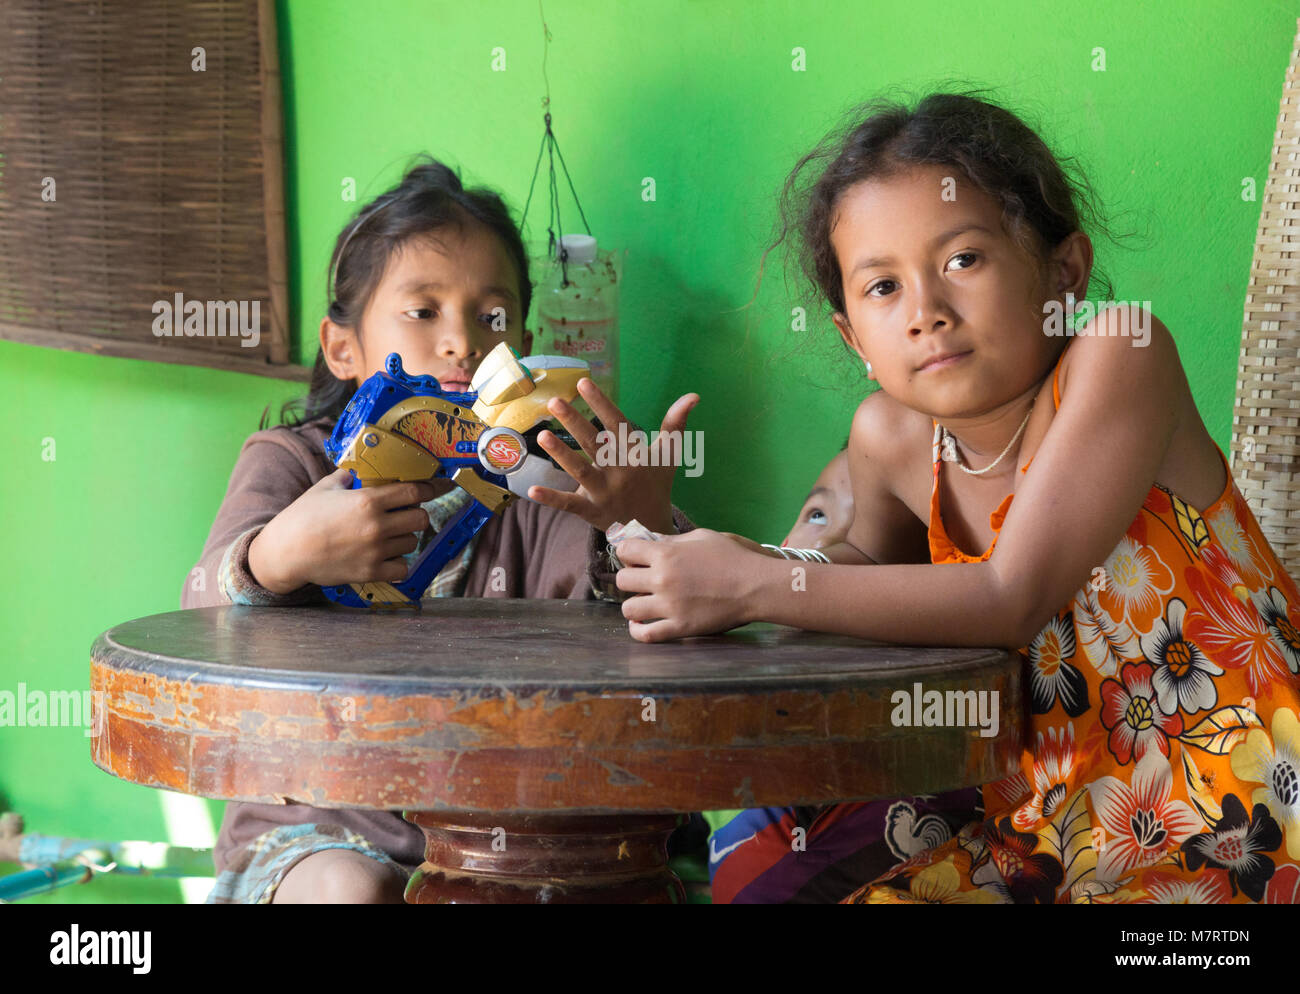 Cambodia children playing with toys,- two girls aged 8-10 years